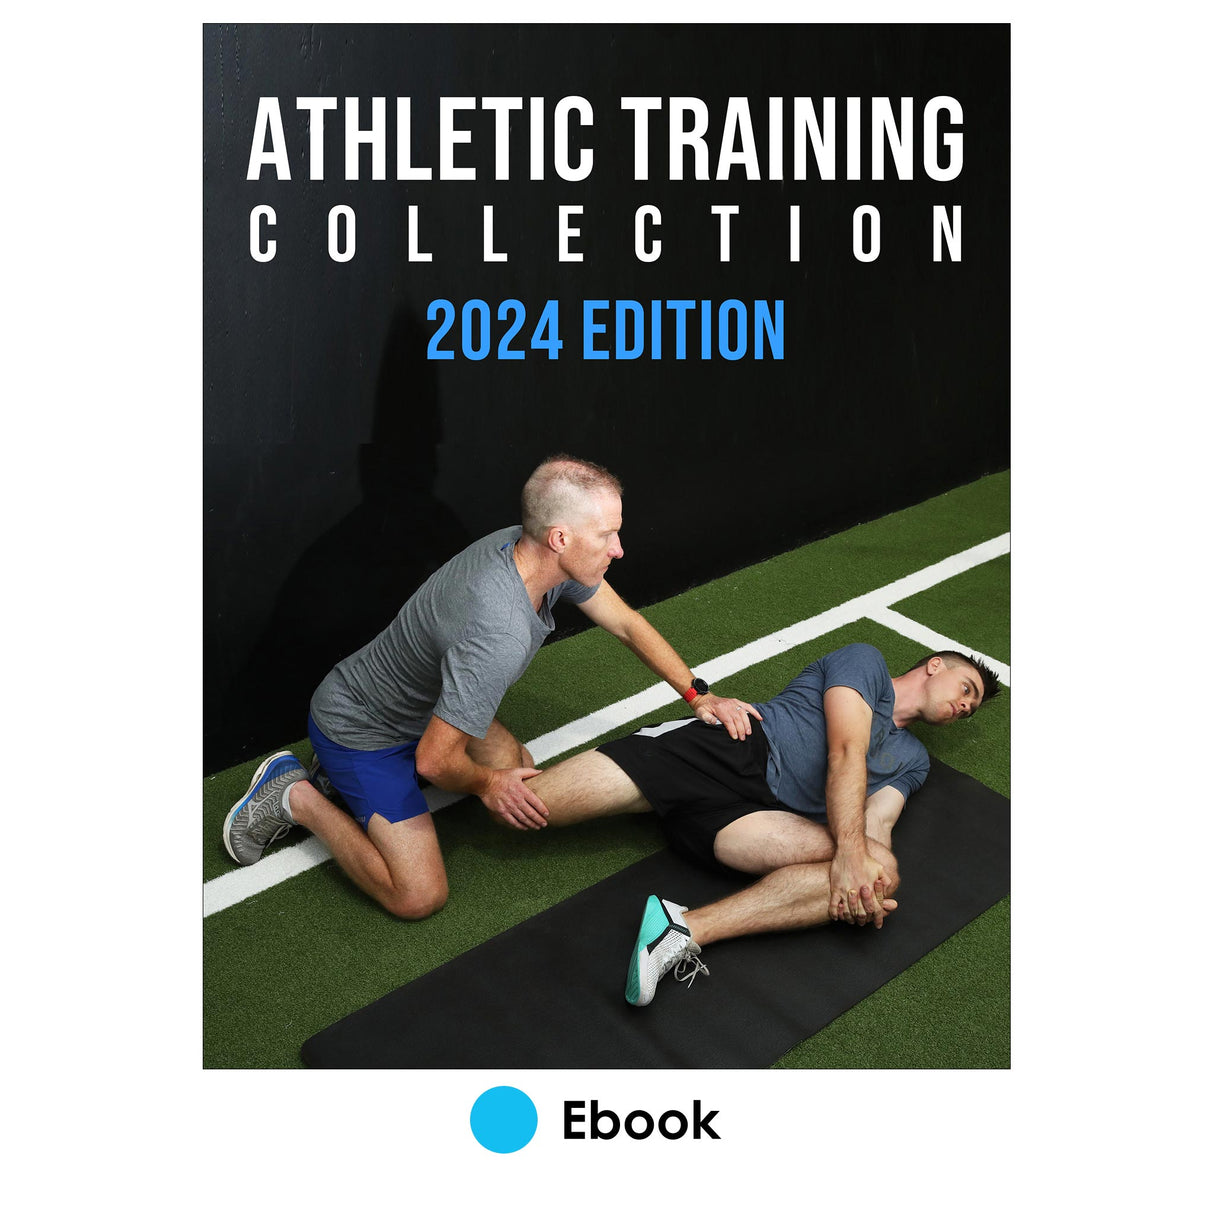 Athletic Training Collection, 2024 Edition